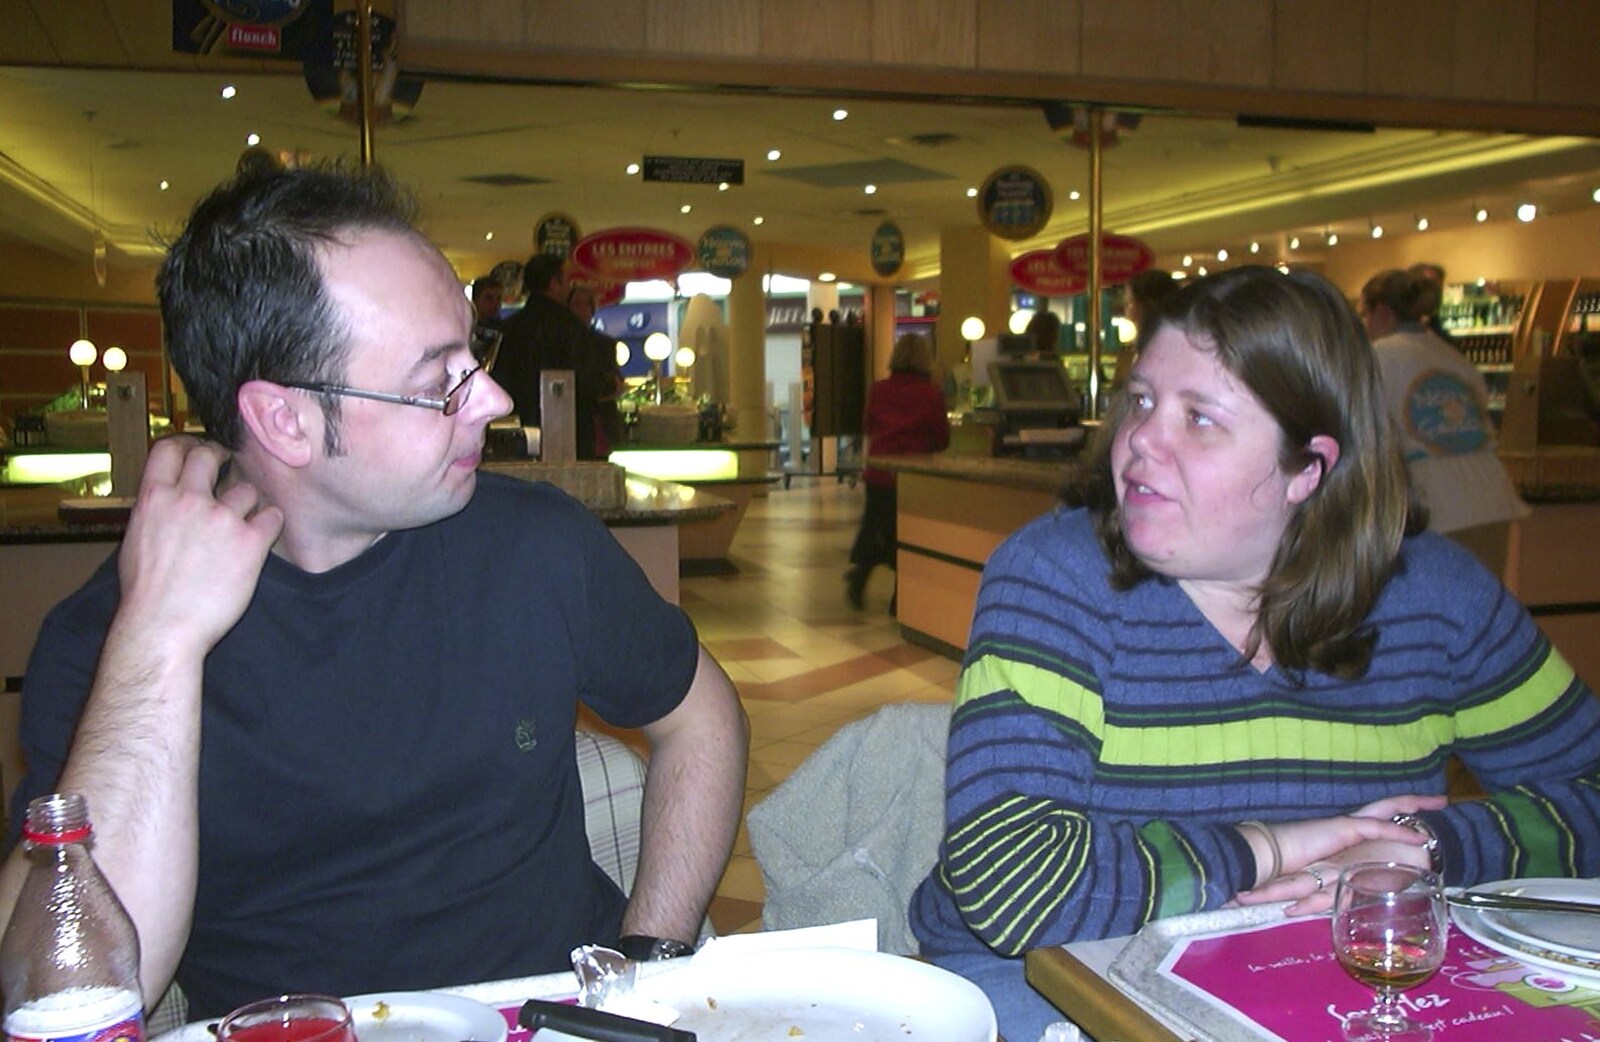 Matt and Sis in a café in France from Fireworks and Fairgrounds with Mikey P, Fair Green, Diss, Norfolk - 5th November 2003